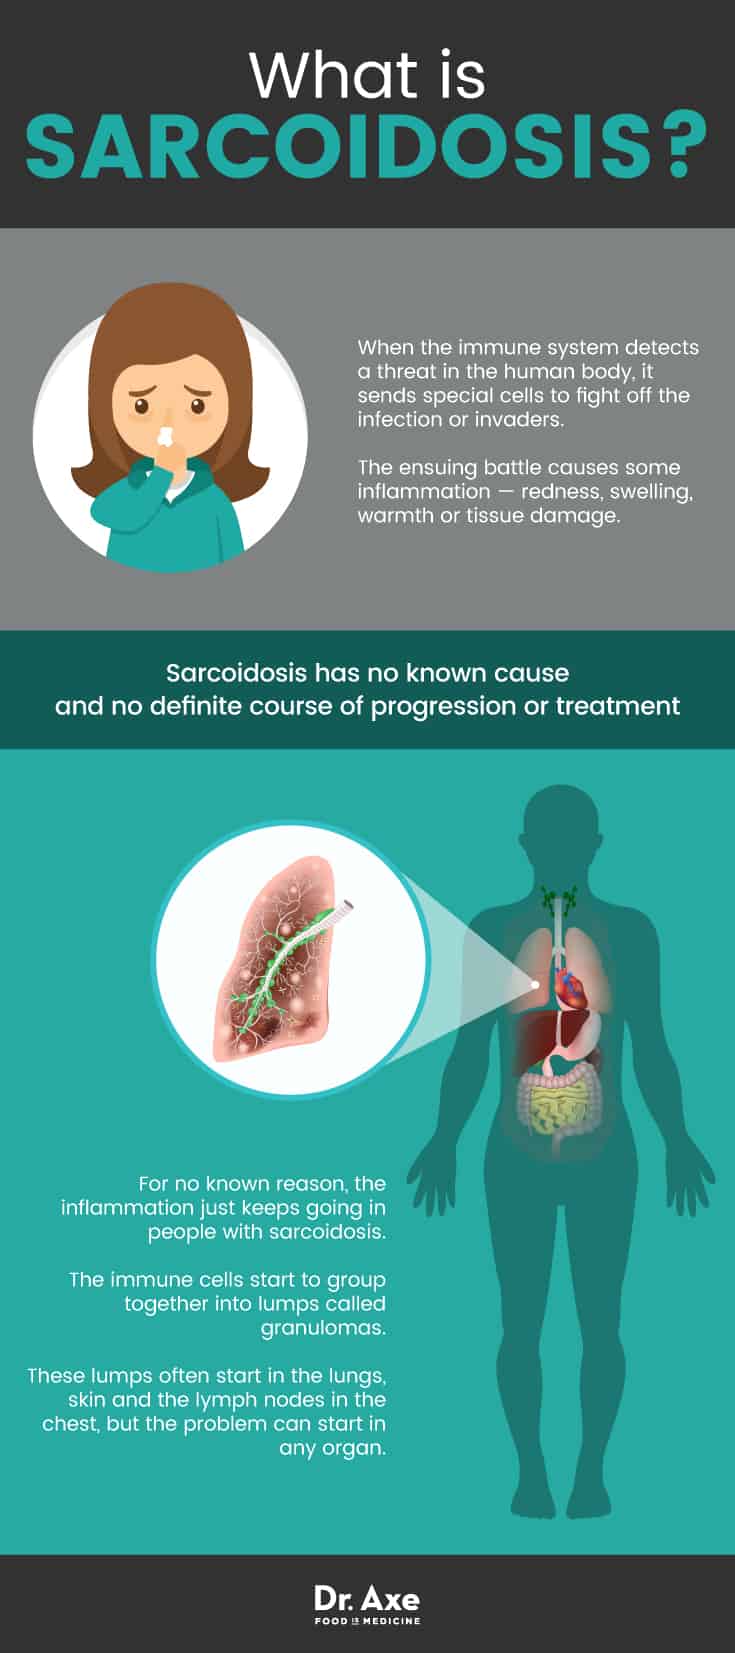 What is sarcoidosis? - Dr. Axe